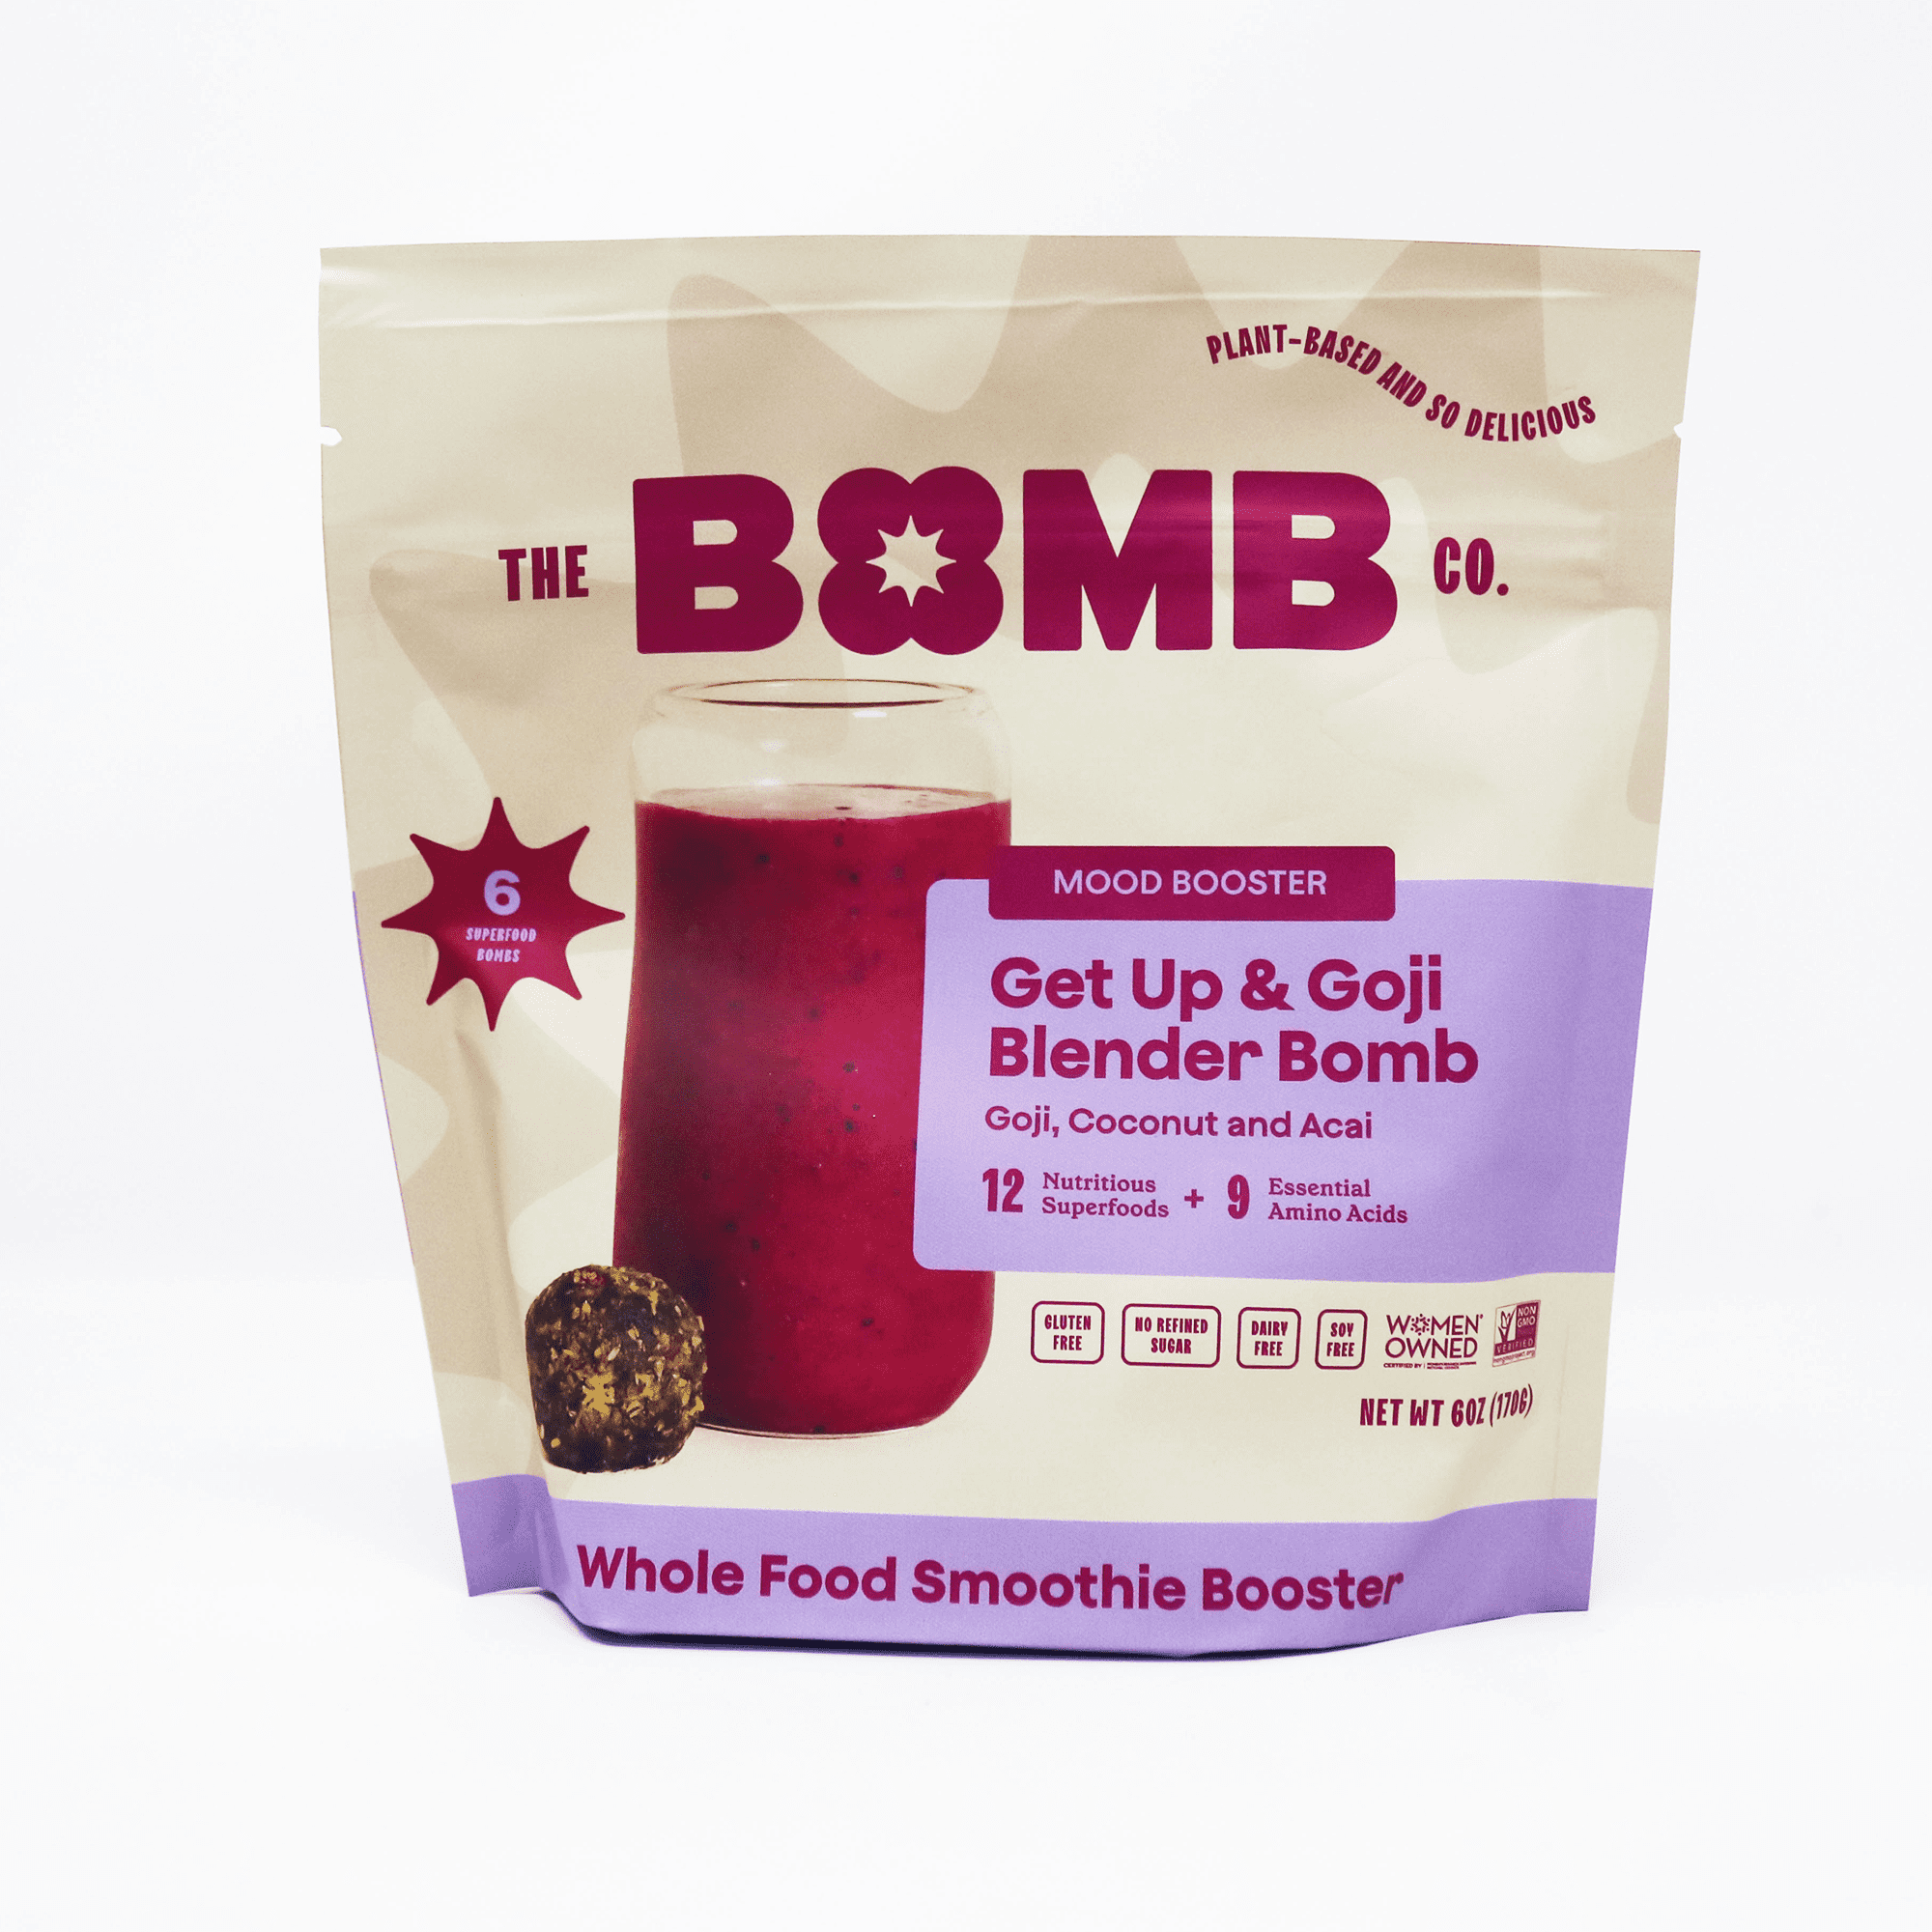 Blender Bombs - Cacao + Peanut Butter 2.3 oz (8 x 2 Pack), SnackMagic